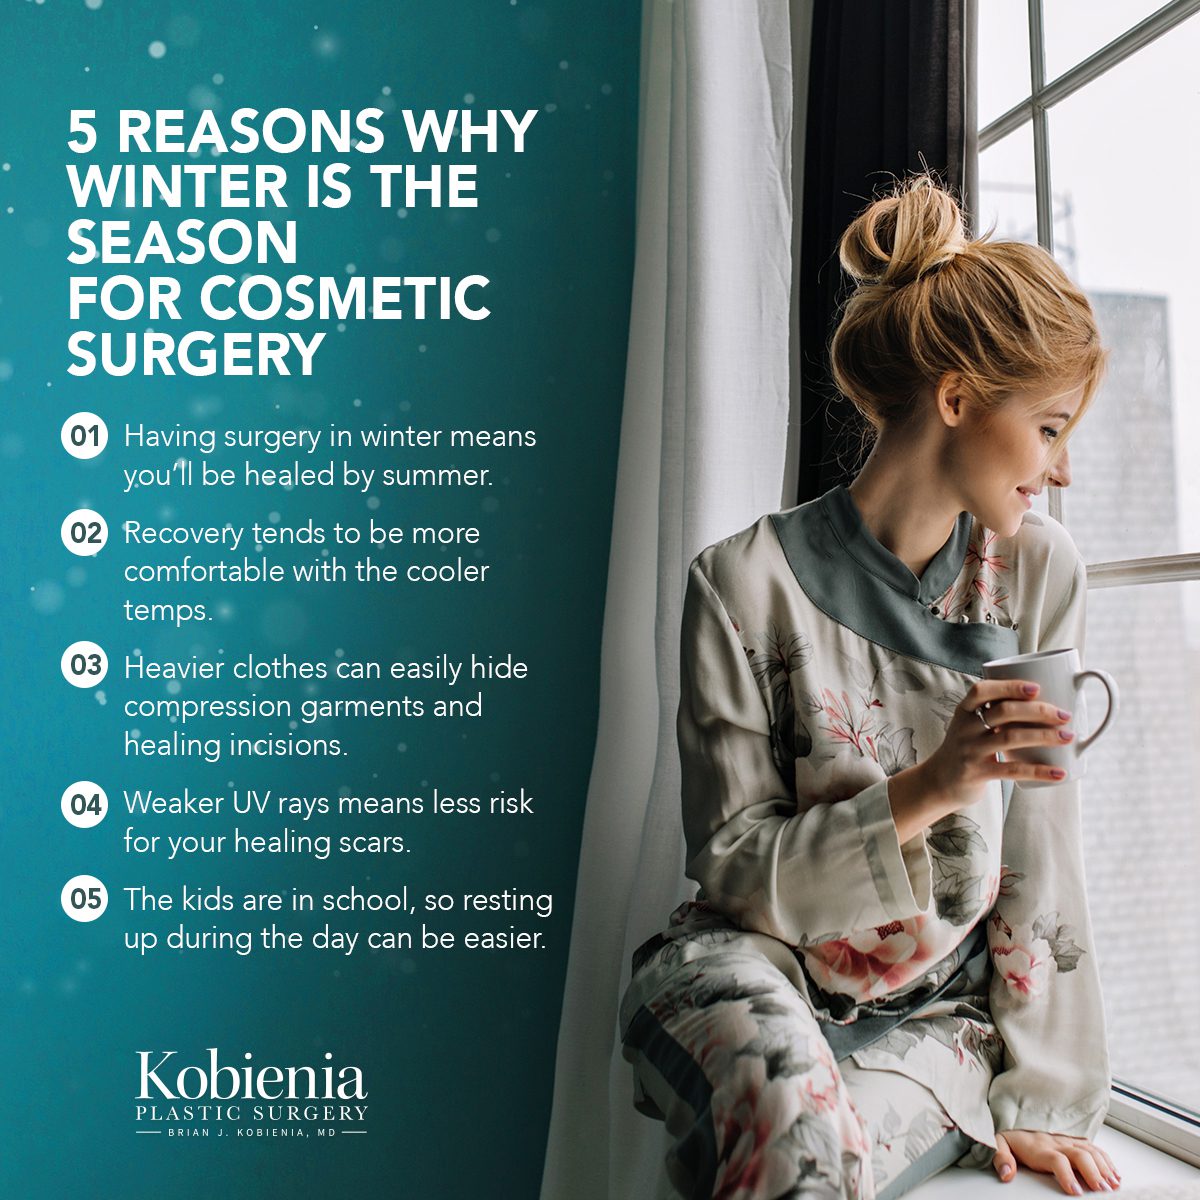 5 Reasons Why Winter Is the Season for Cosmetic Surgery